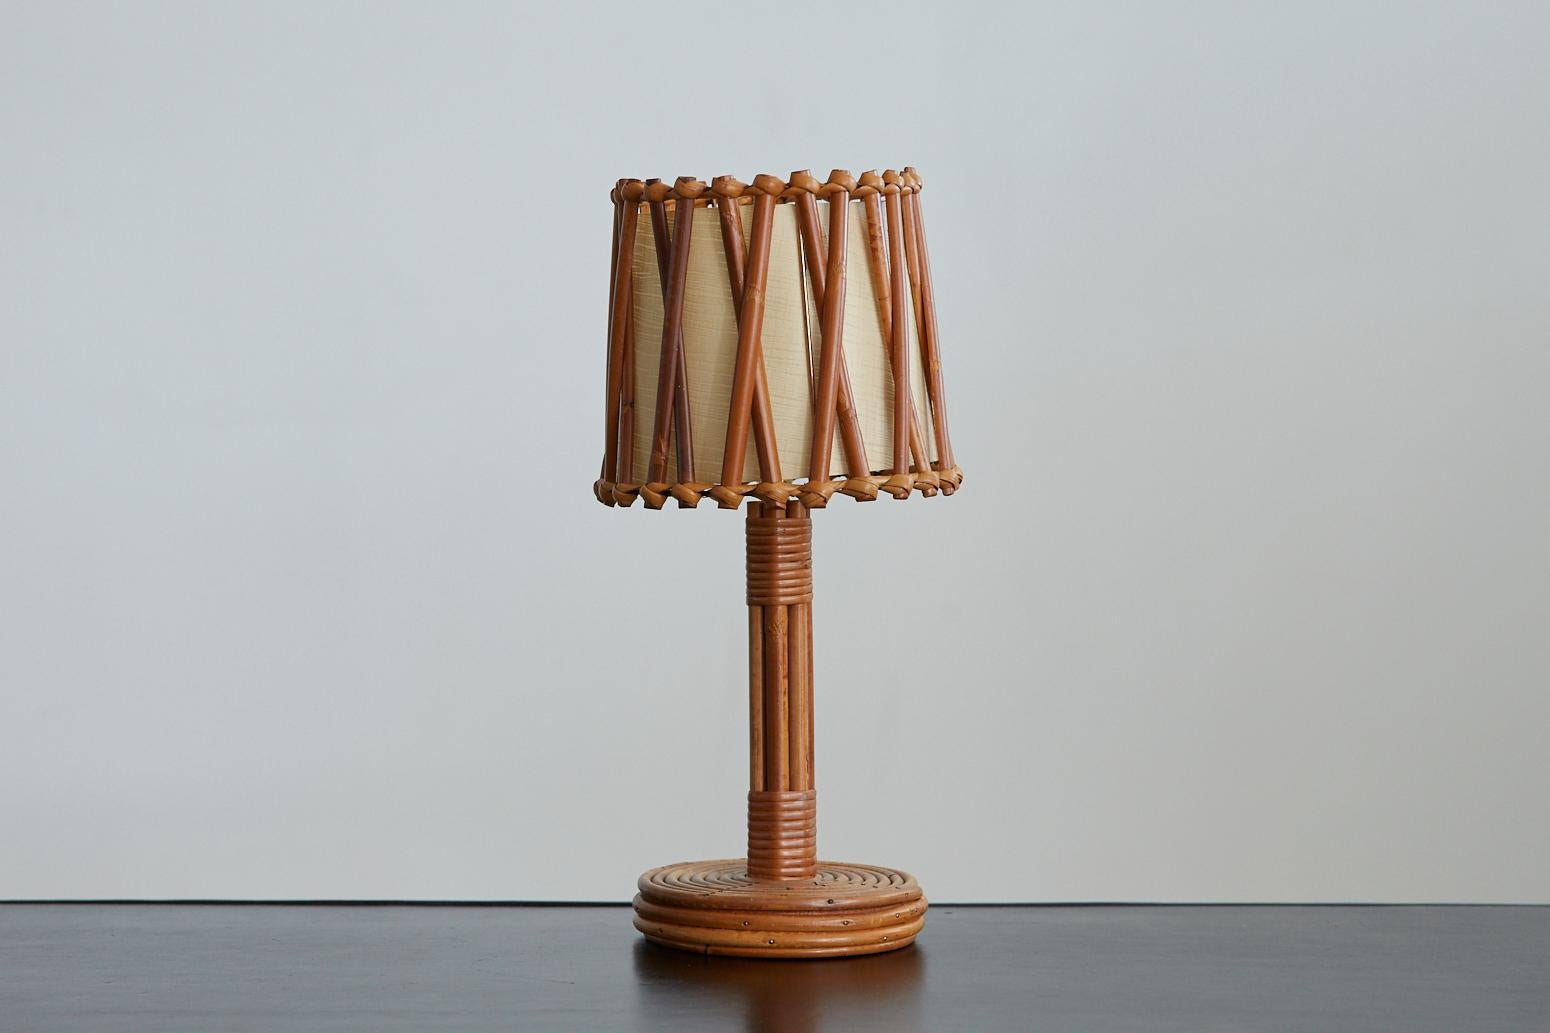 Petite French bamboo table lamp with original bamboo shade and paper diffuser. Circular bamboo base and stem with wrapped rattan detail. Newly re-wired.